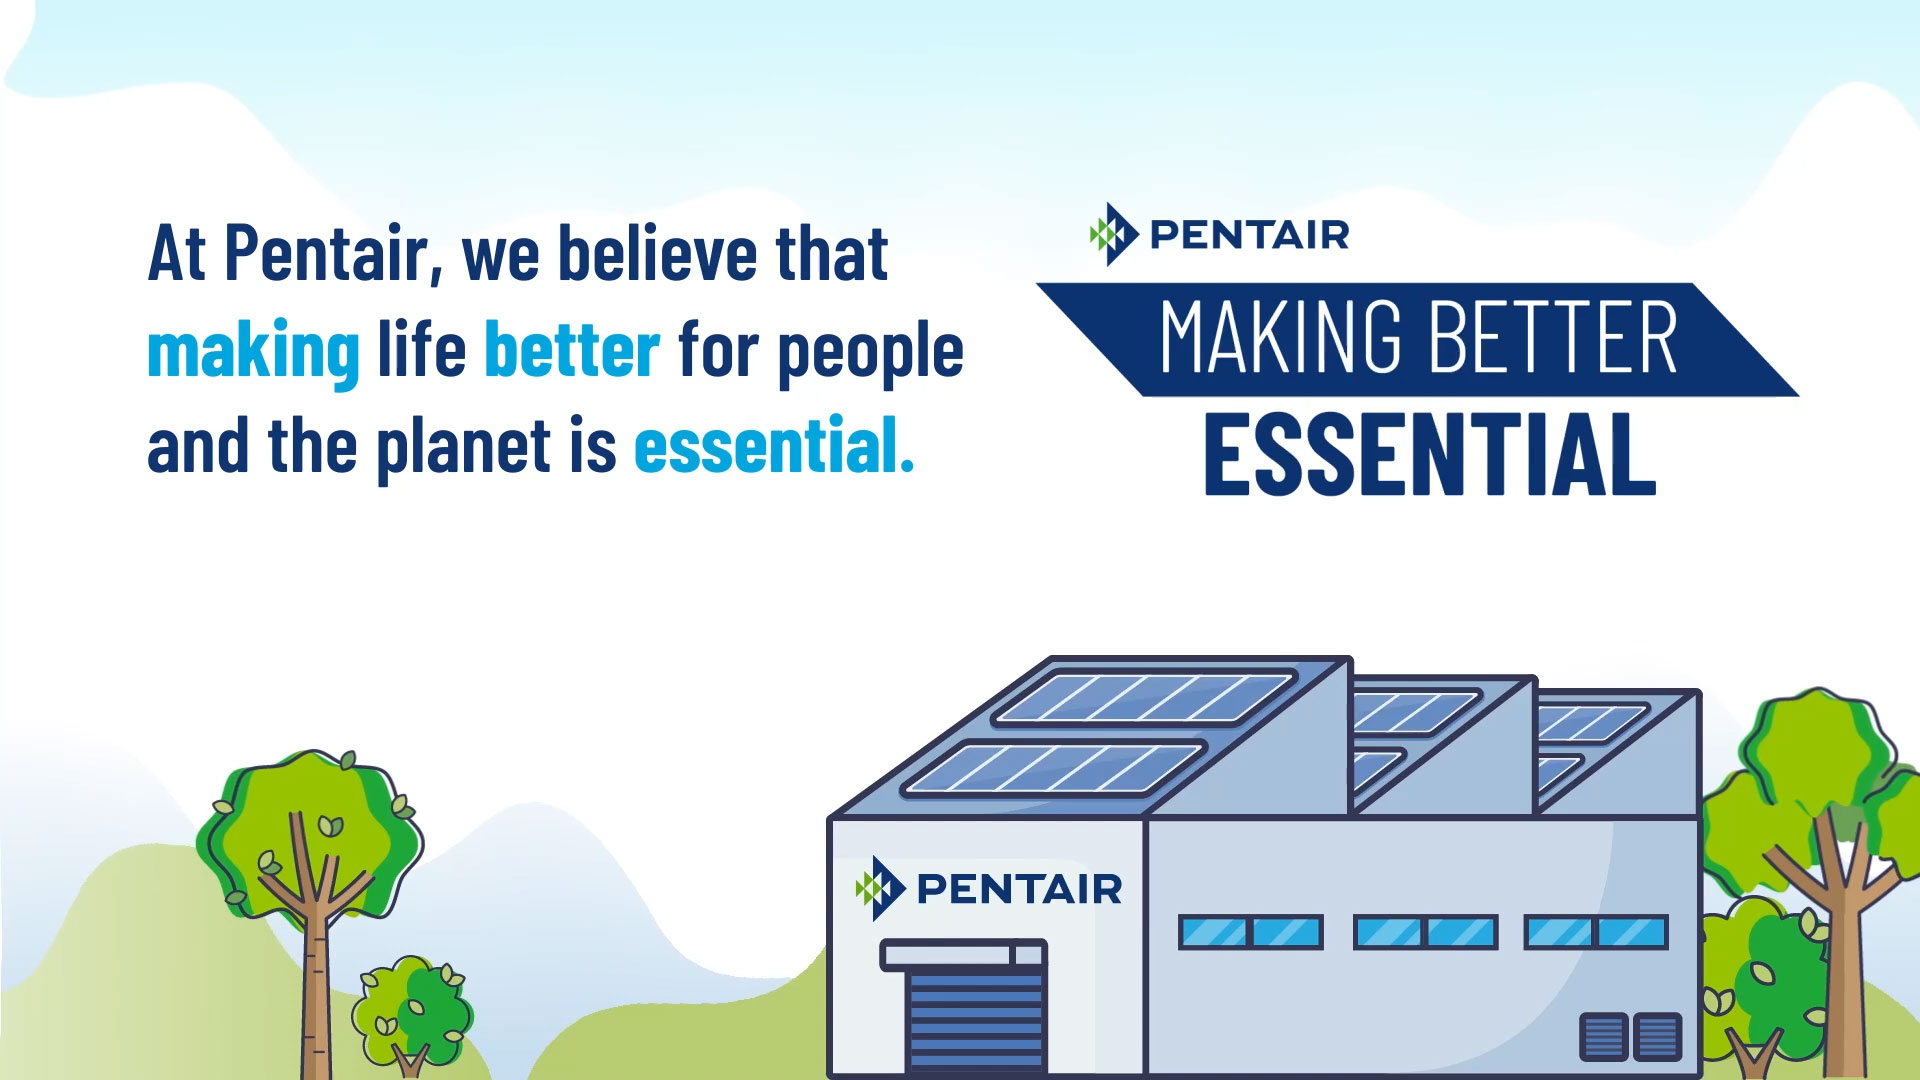 Pentair's social responsibility efforts and corporate responsibility program are guided by Making Better Essential.